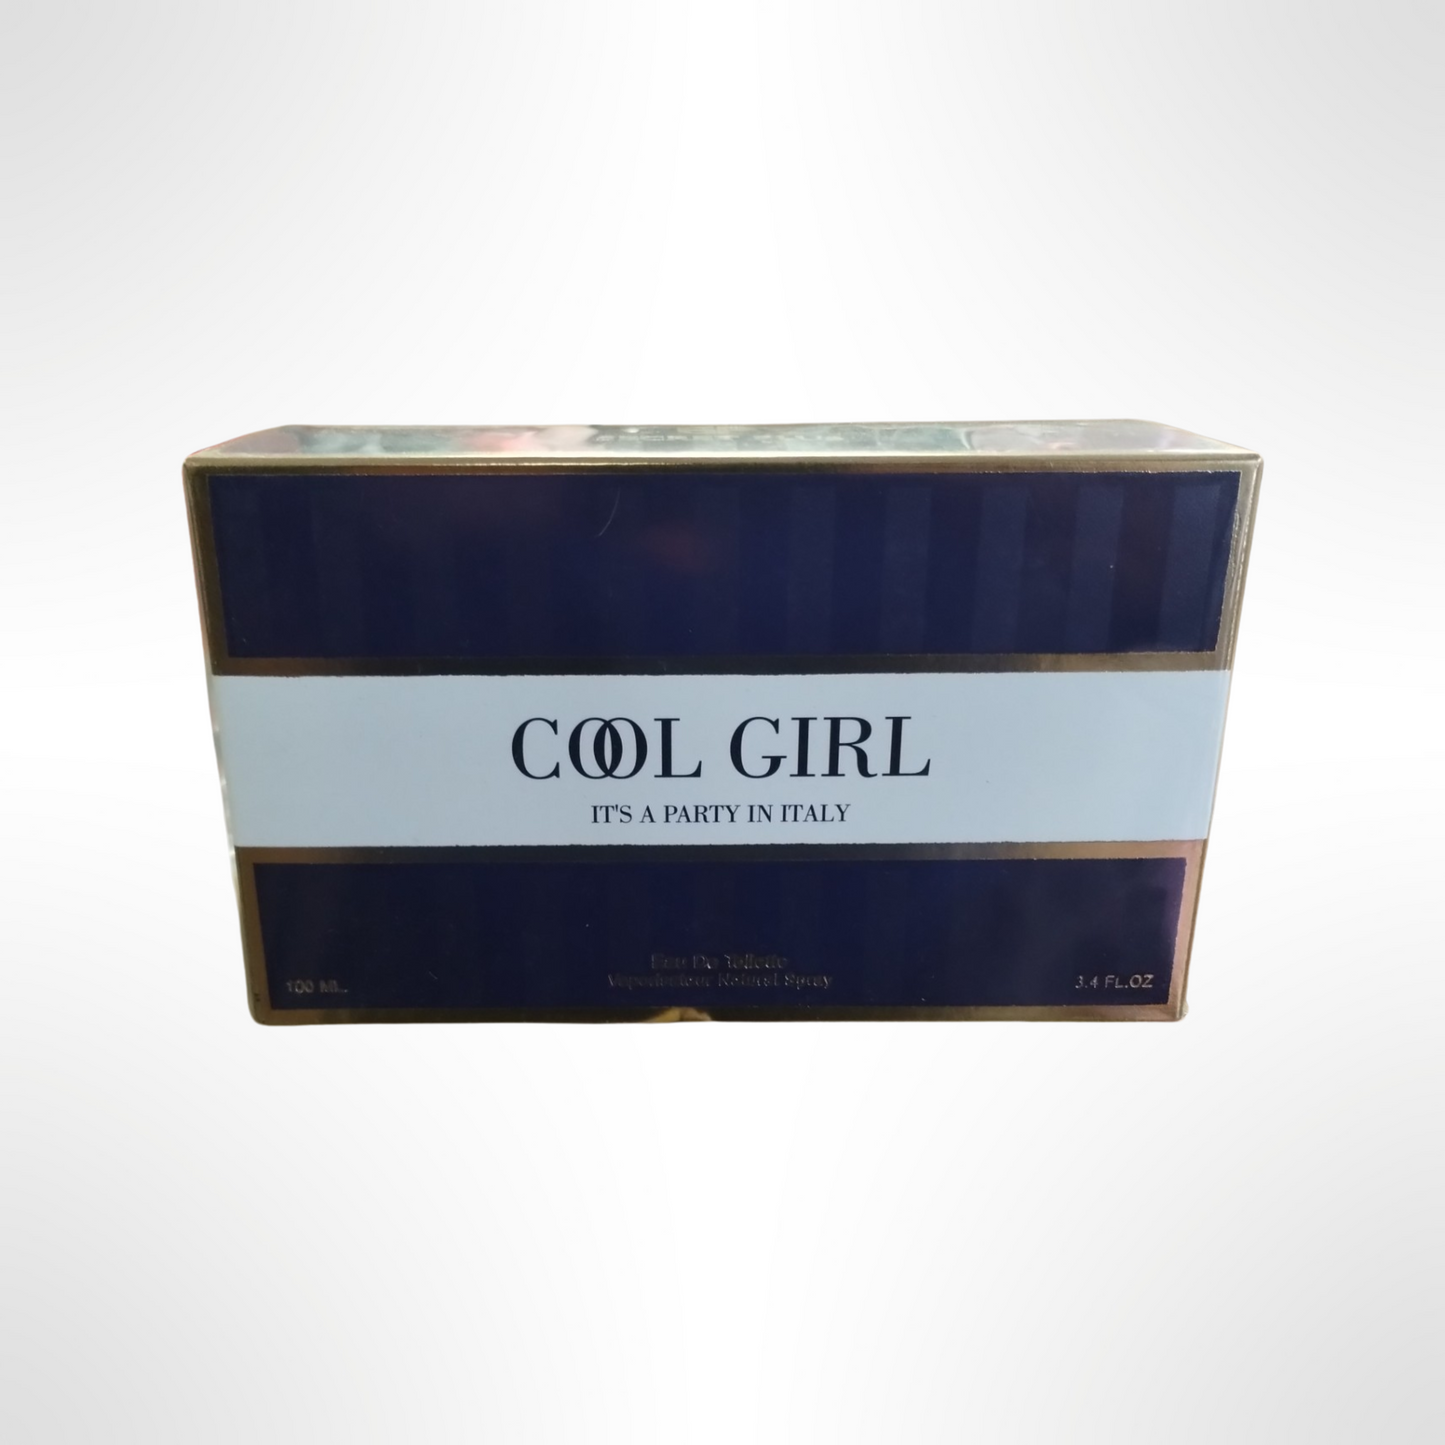 SP - Cool Girl "Its A Party In Italy" - Women's Perfume